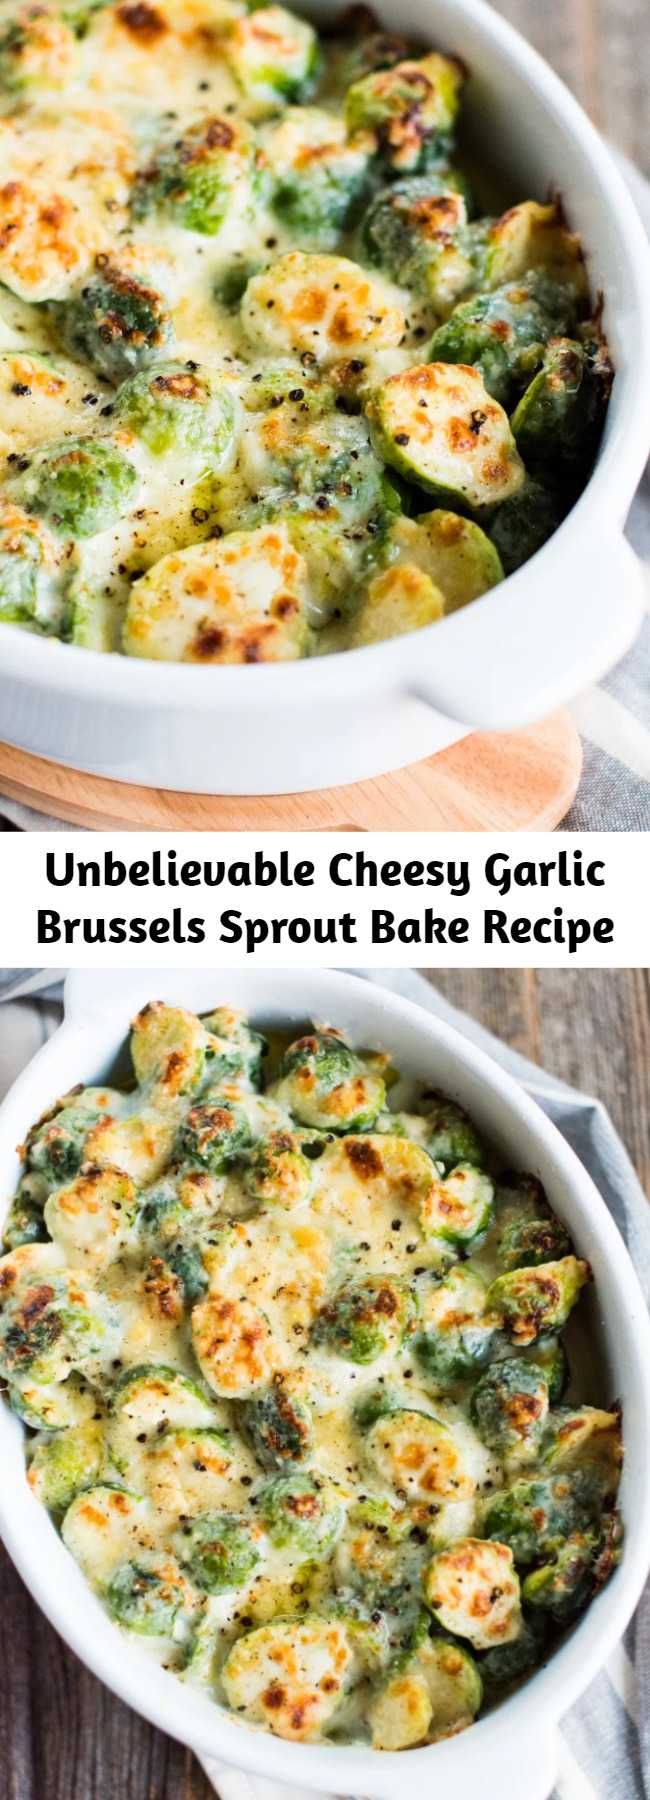 Unbelievable Cheesy Garlic Brussels Sprout Bake Recipe - This recipe takes brussels sprouts goodness to the next level and is so creamy and rich you would swear it’s decadent, when really it’s under 140 calories serving and full of veg! Yum.